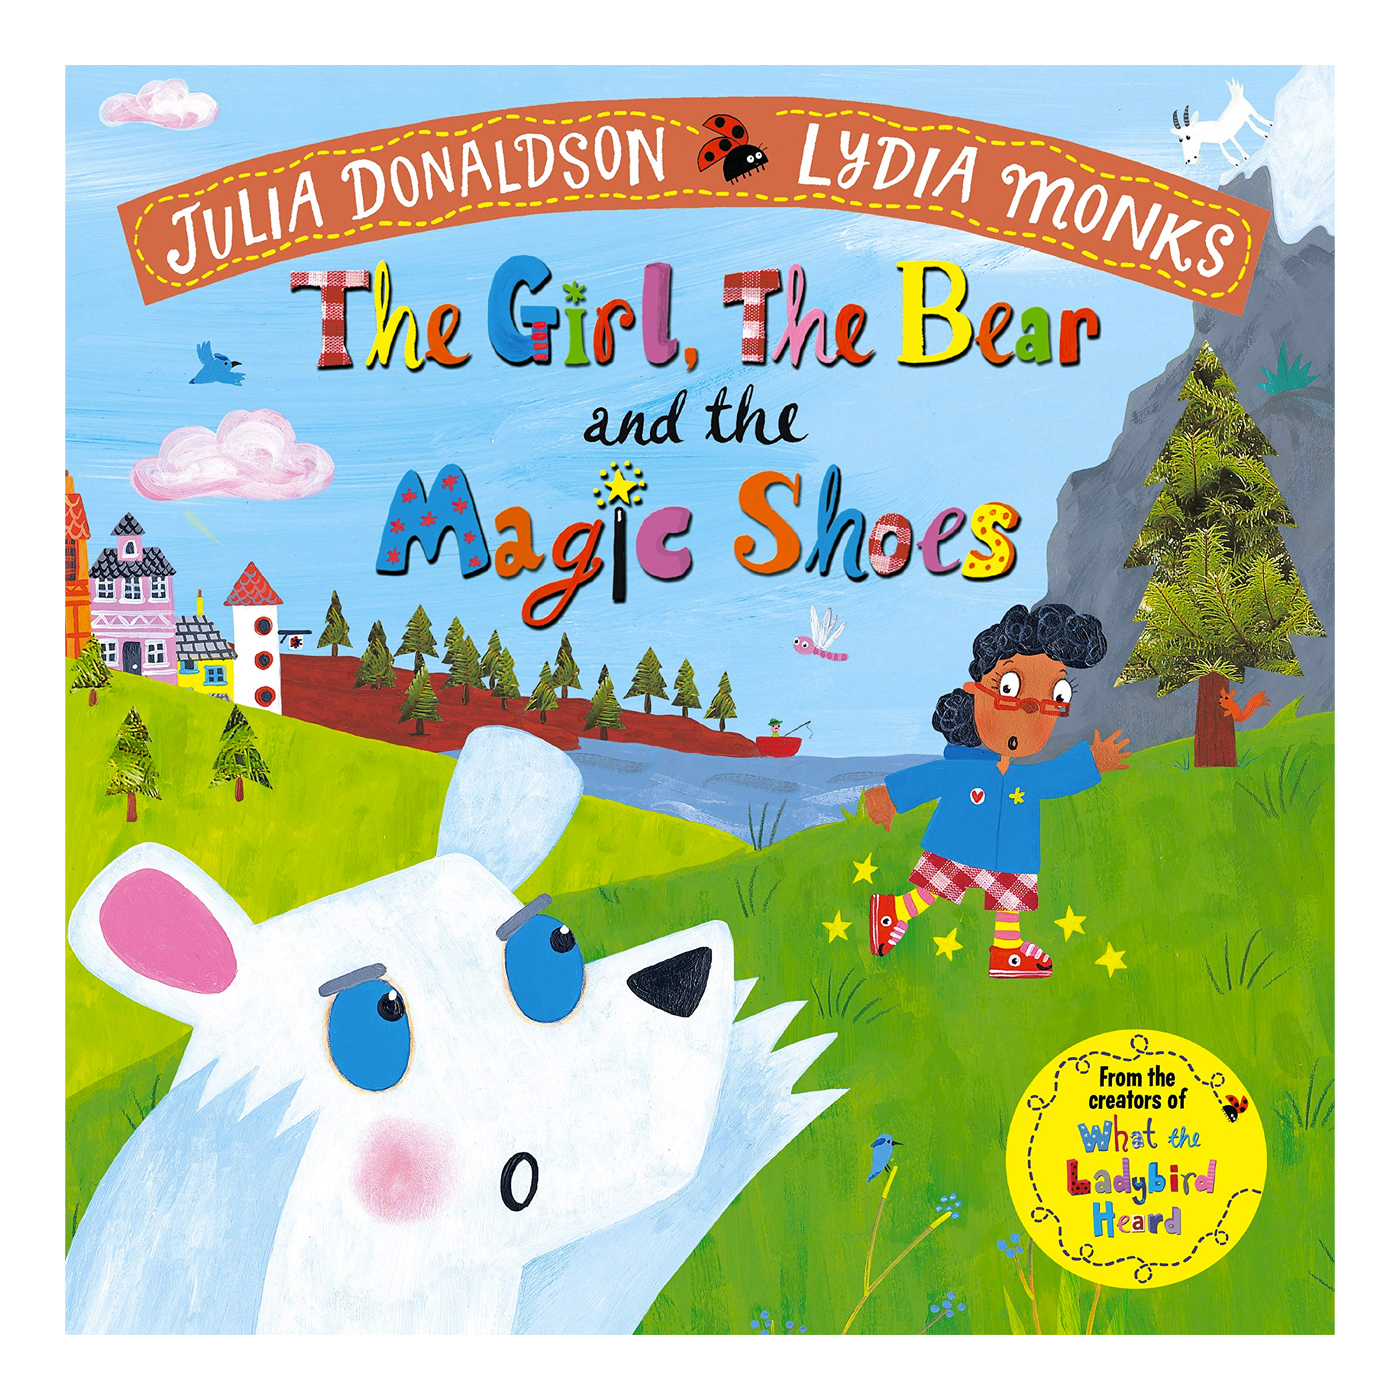  The Girl, the Bear and the Magic Shoes